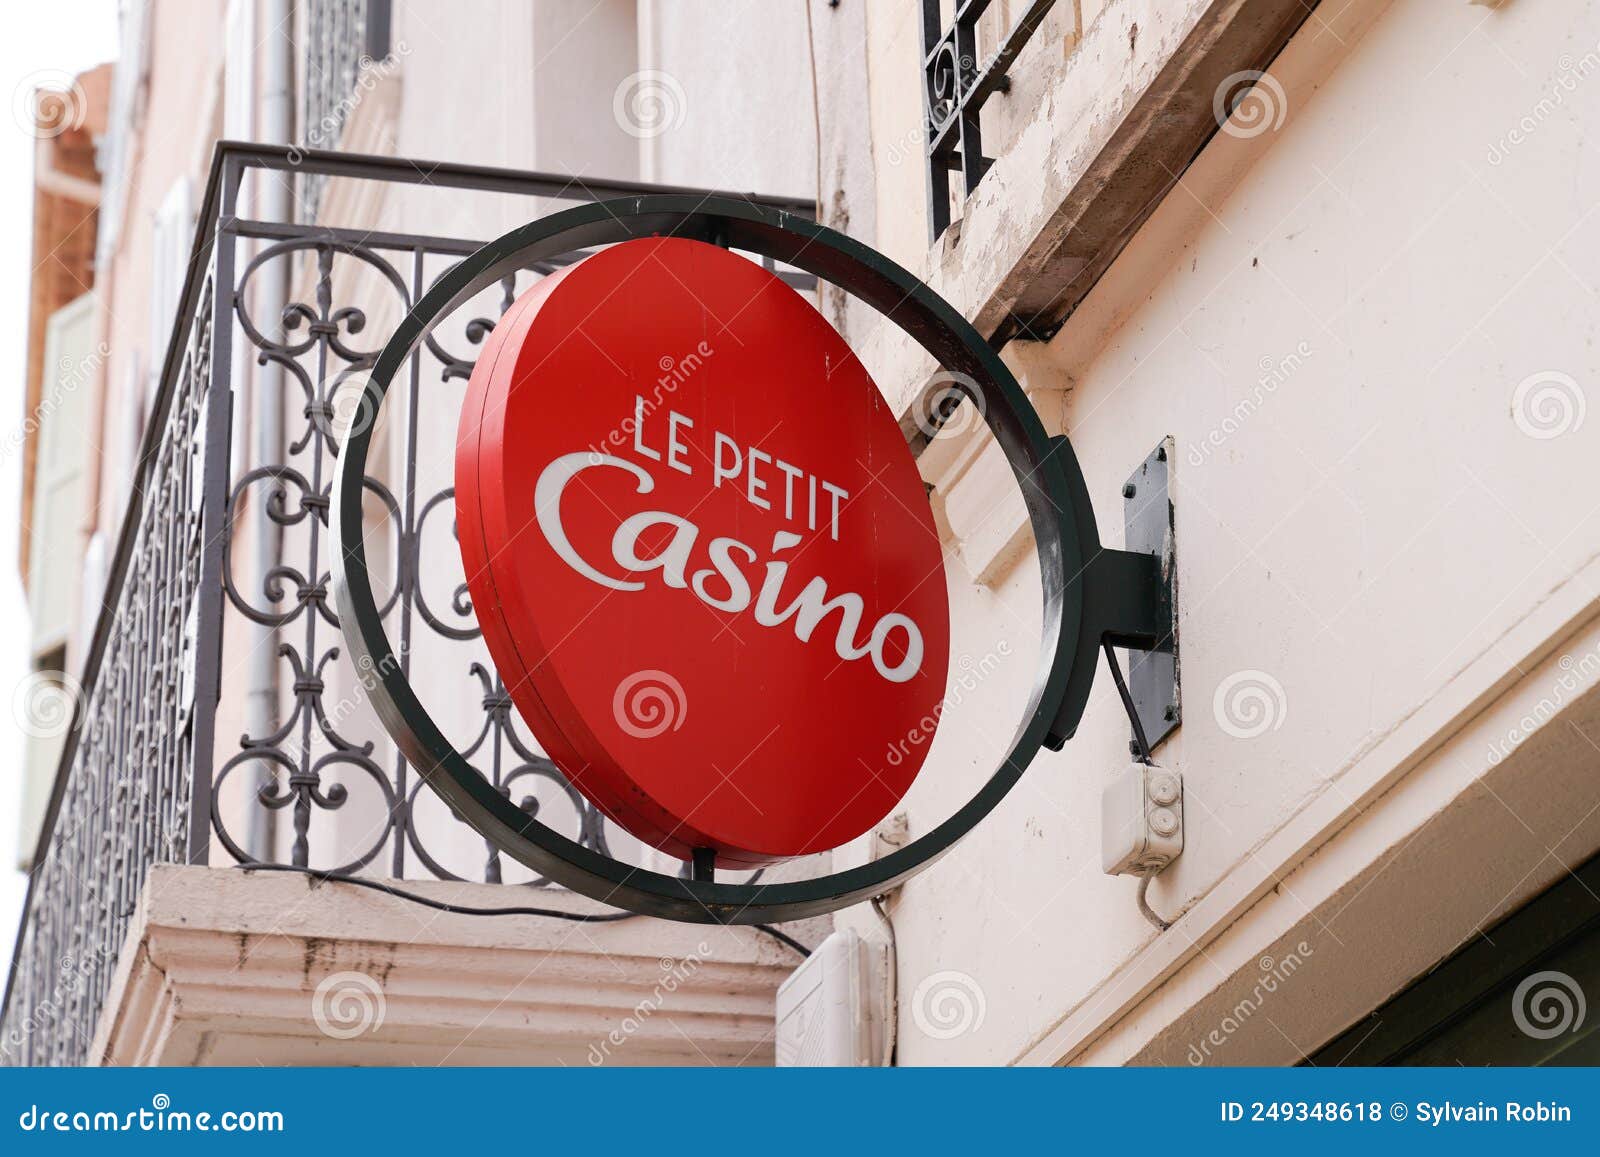 Le Petit Casino Logo Text and Brand Sign Store French Retailer Facade ...